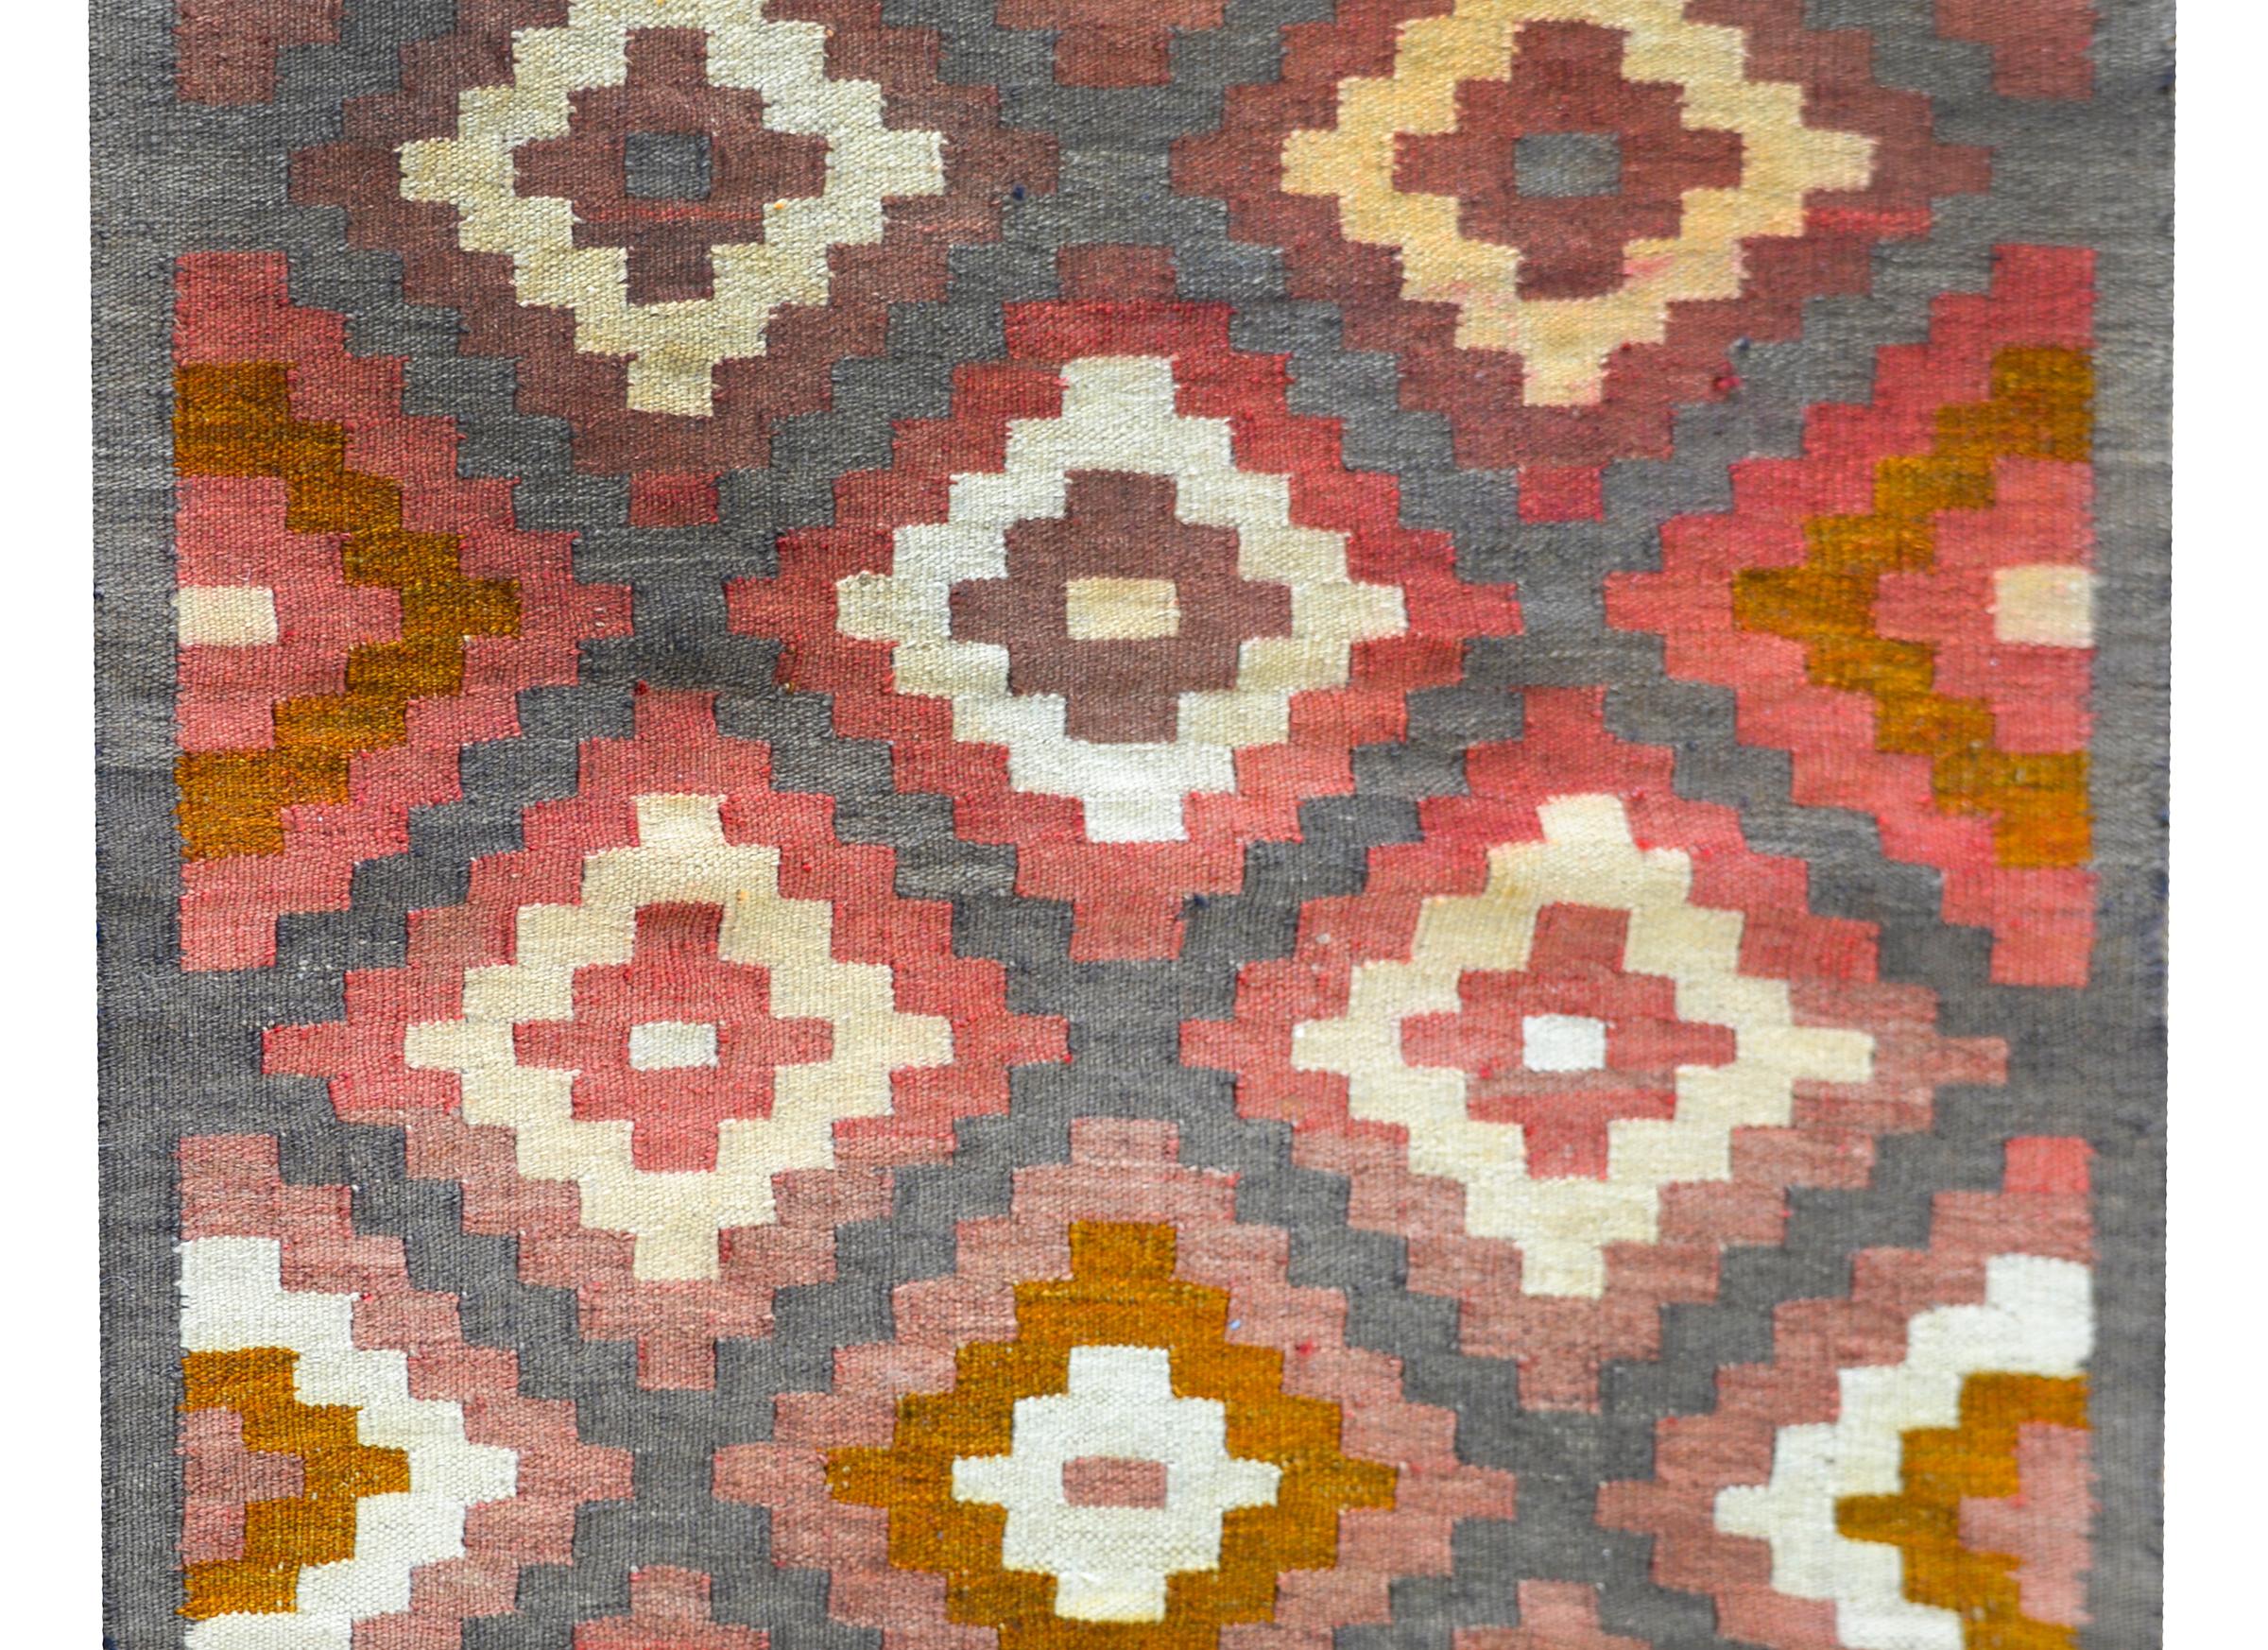 A wonderful vintage Afghani Kilim rug with an all-over diamond pattern woven in myriad colors including crimson, gold, gray, and white, and with ends woven in simple striped patterns.